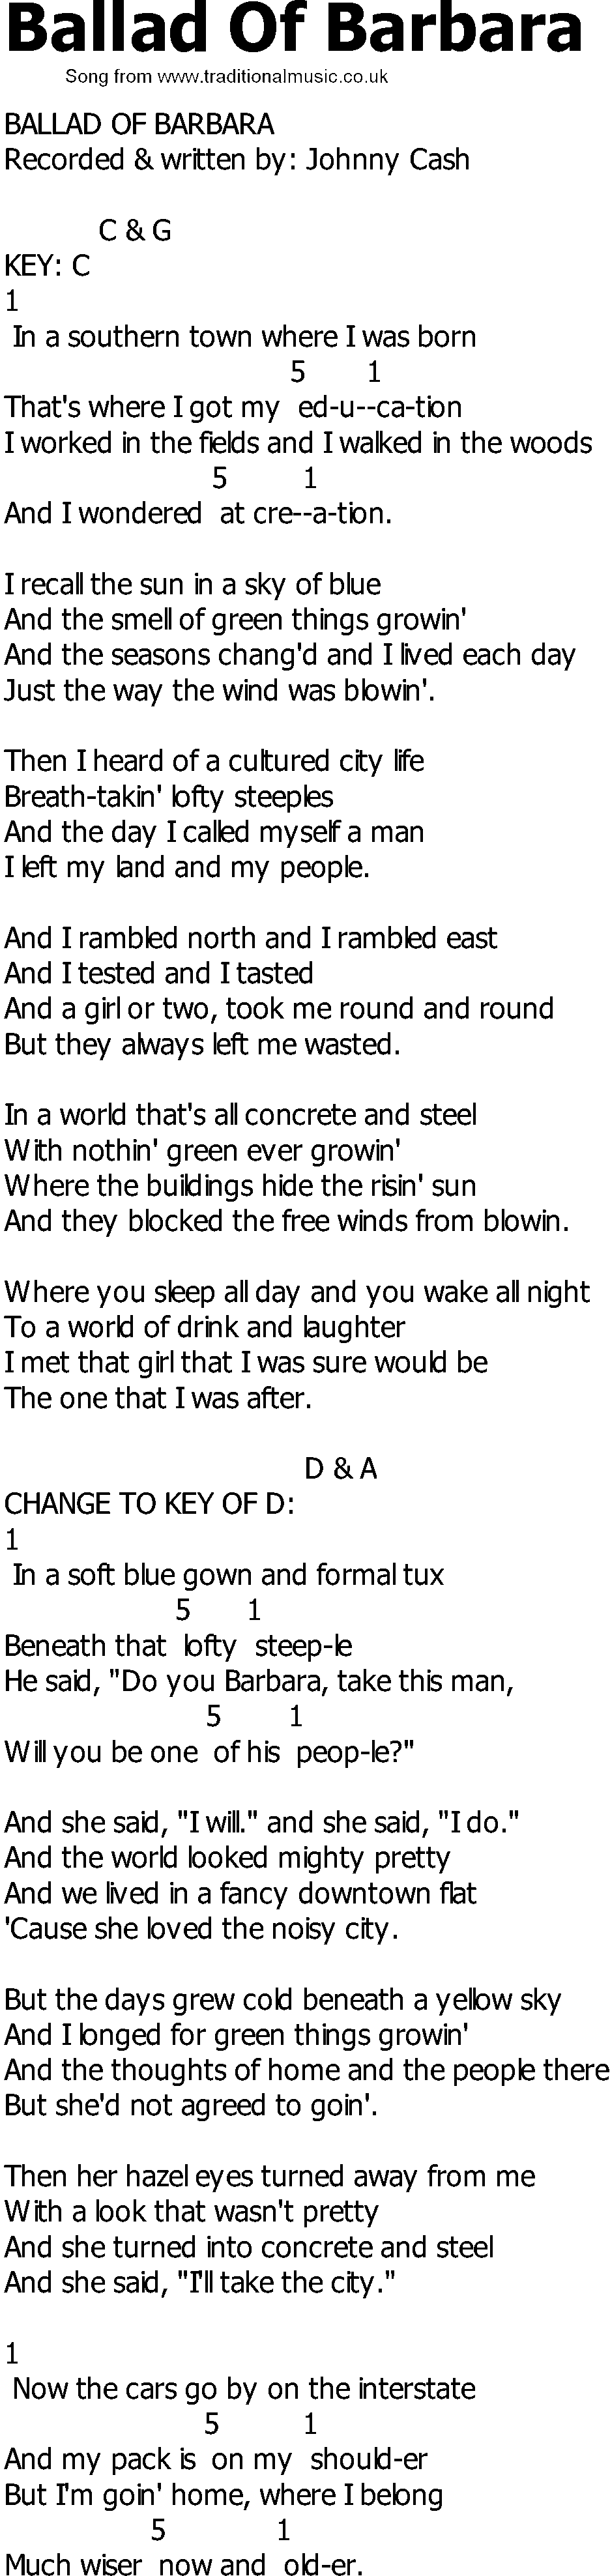 Old Country song lyrics with chords - Ballad Of Barbara